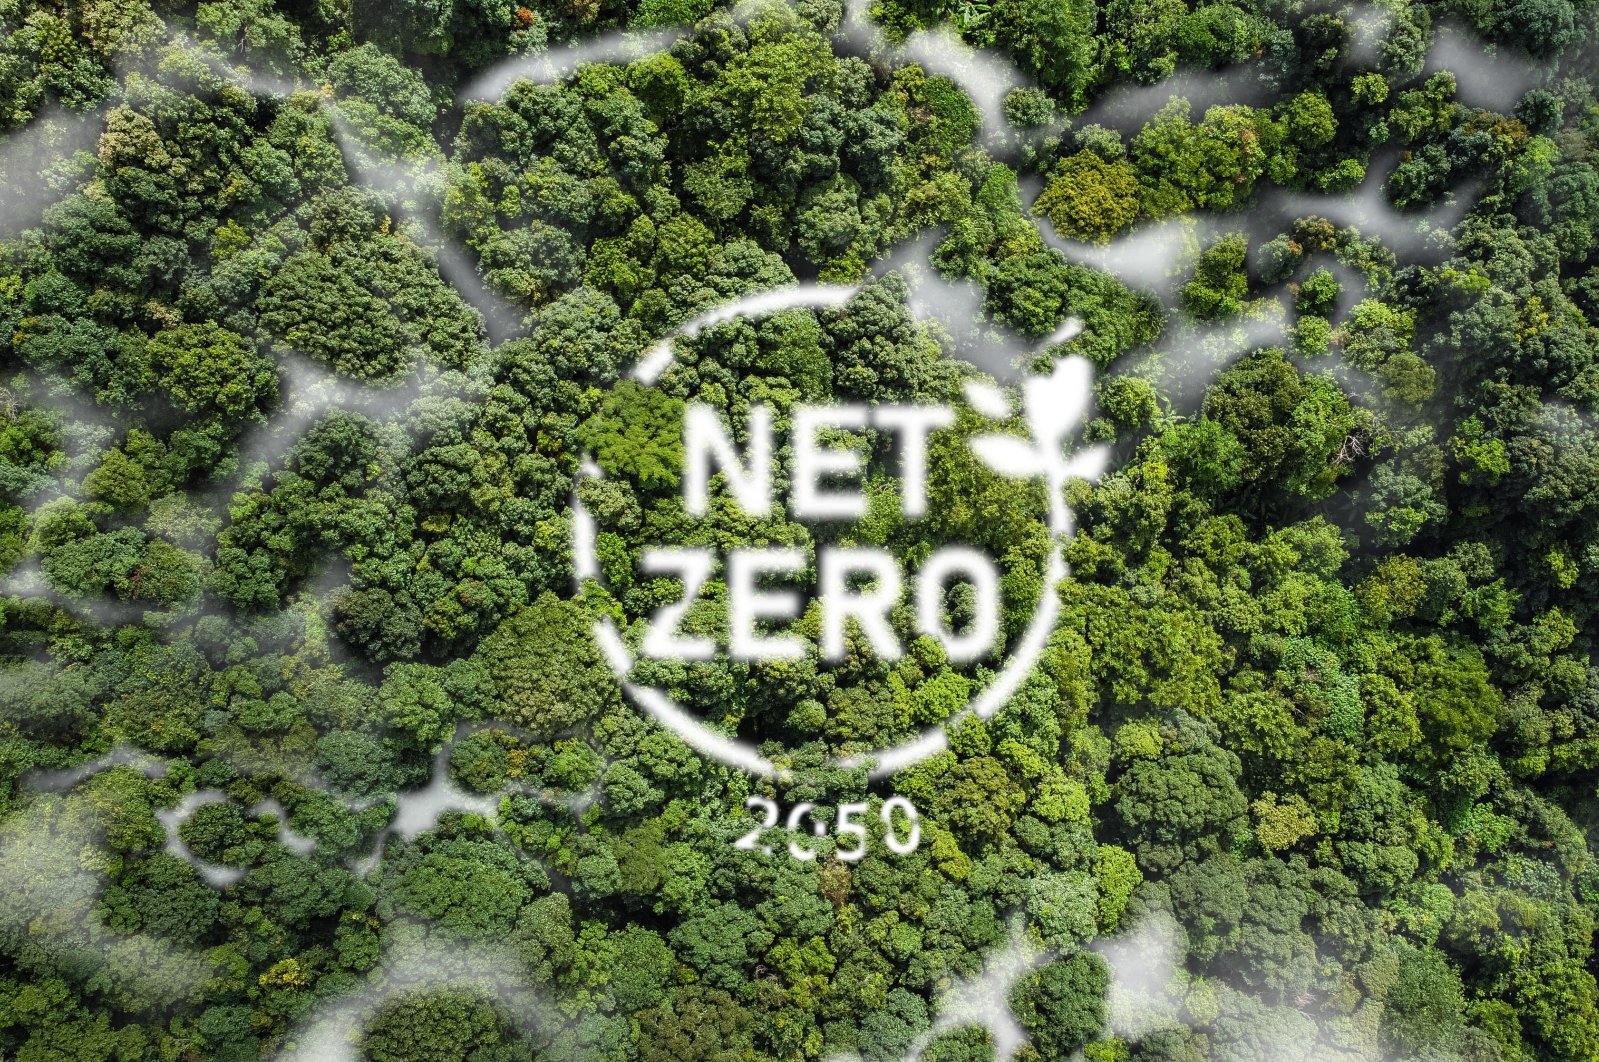 After the EU led the way by proposing a European Green Deal in 2019, the pledge to become carbon-neutral with zero net emissions of greenhouse gases by 2050 became the new target of more than 136 countries. (Shutterstock Illustration)